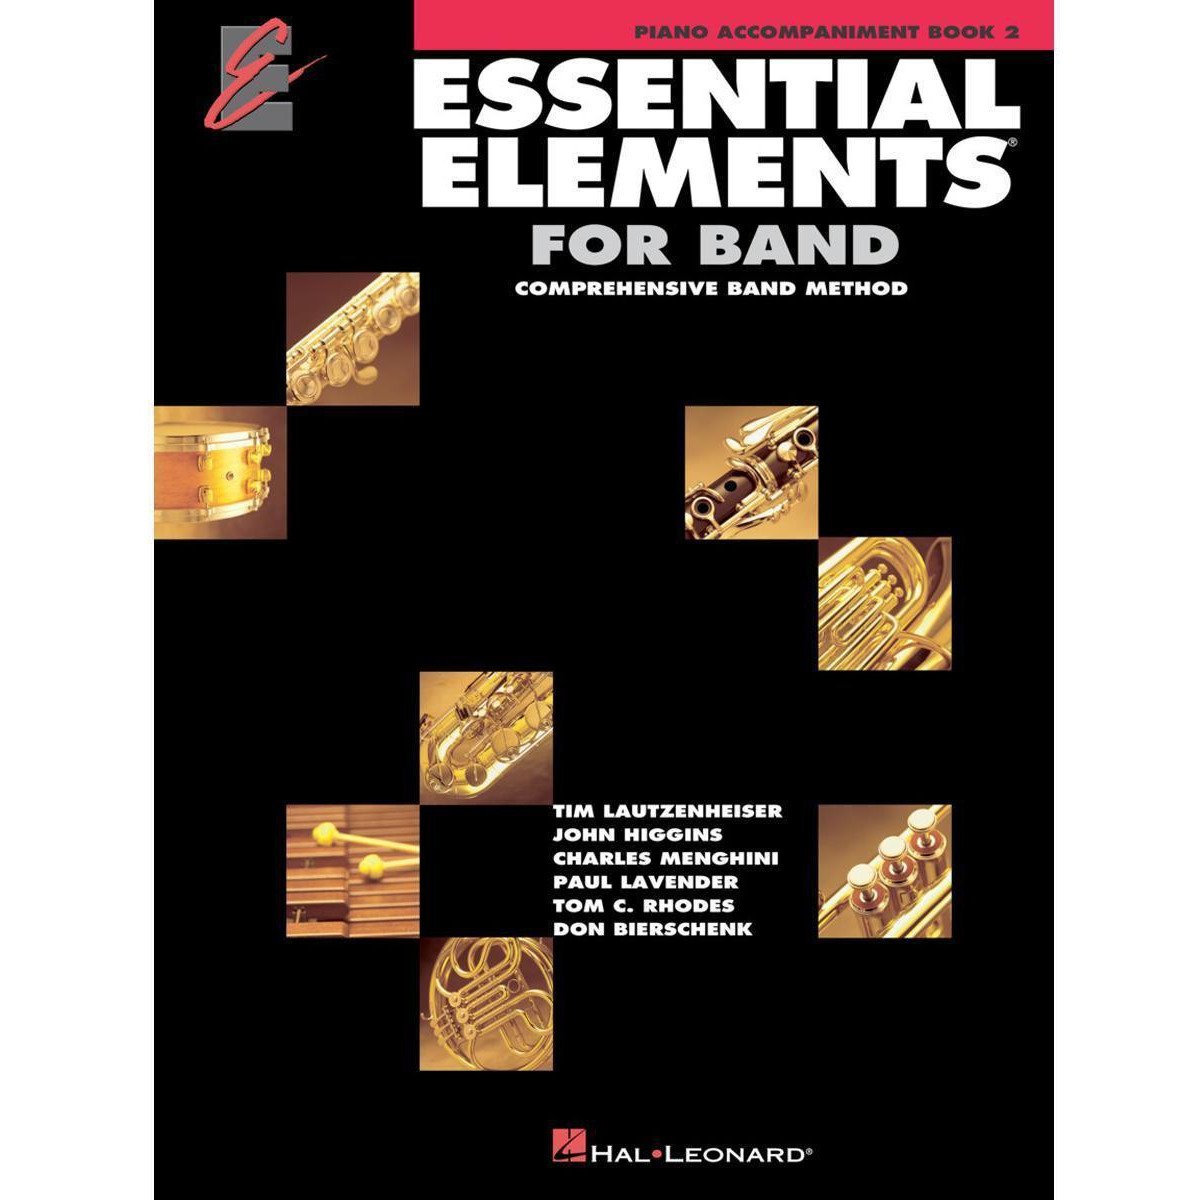 Essential Elements for Band Book 2-Piano Accompaniment-Andy's Music